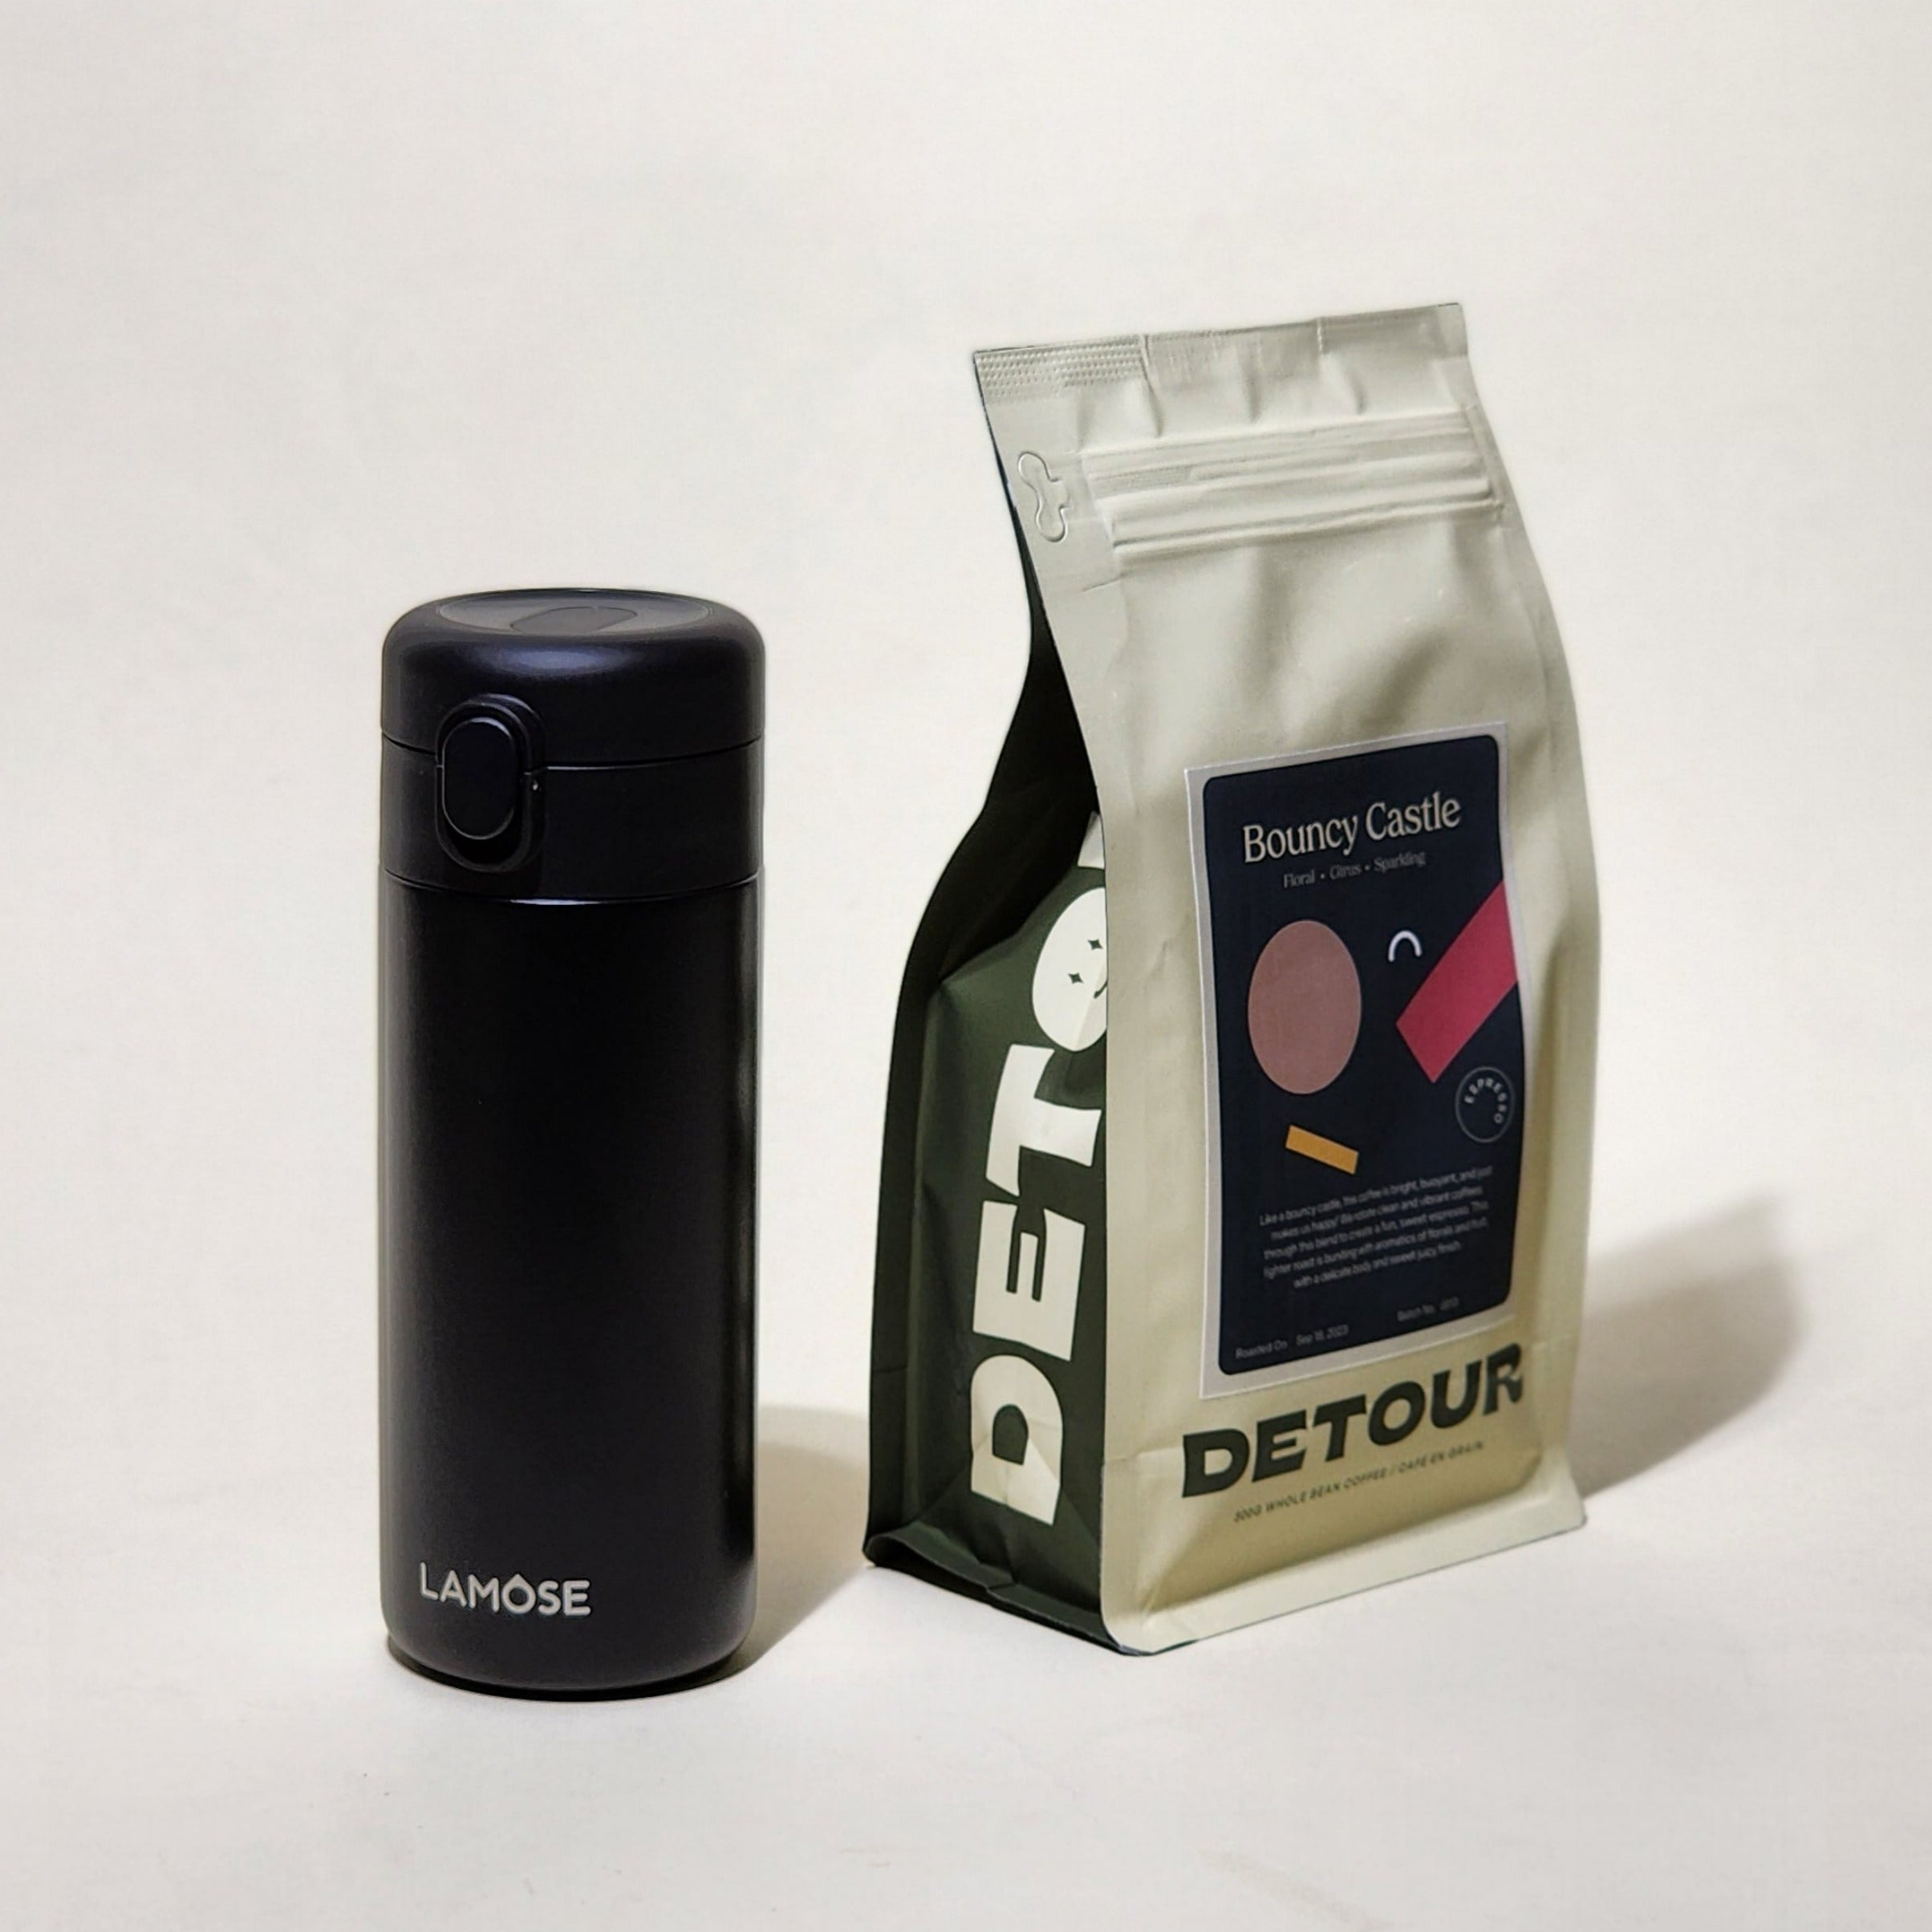 Detour Coffee Roaster Bouncy Castle Espresso - Floral, Citrus, Sparkling Tasting Profile - Espresso Vibrant Coffee Style - Limu, Ethiopia Origin - Heirloom Variety - Washed Process - Various Smallholders Producer - Bright and Buoyant Coffee - Sunshine in a Cup - Learn More on Our Website